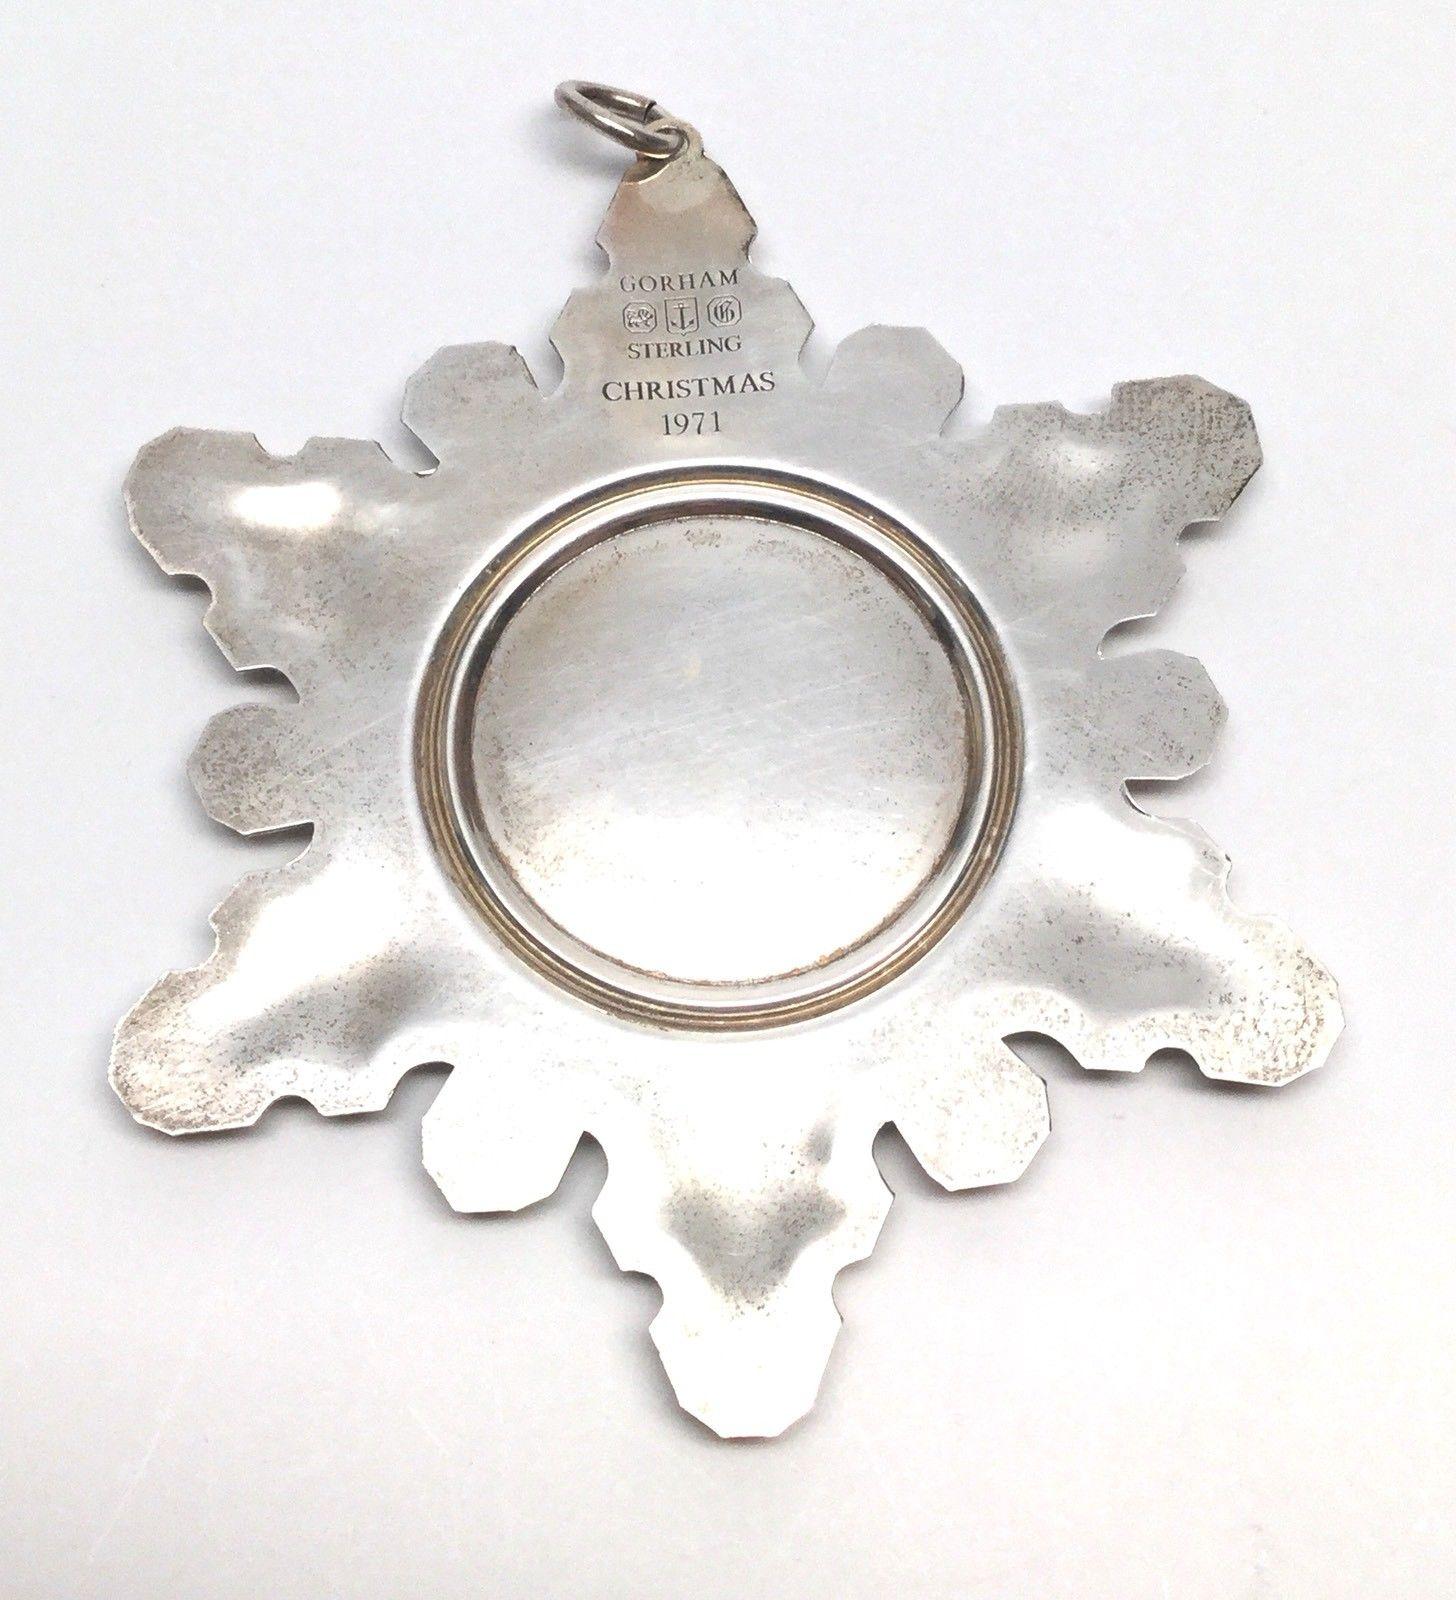 1971 Gorham sterling silver Christmas Star ornament. This is a beautiful 1971sterling silver Christmas Star ornament designed by Gorham. Measurement: Approximate 3 7/16 inches L x 3 1/4 inches W. Hangs approximate 3 1/2 inches from the top of the